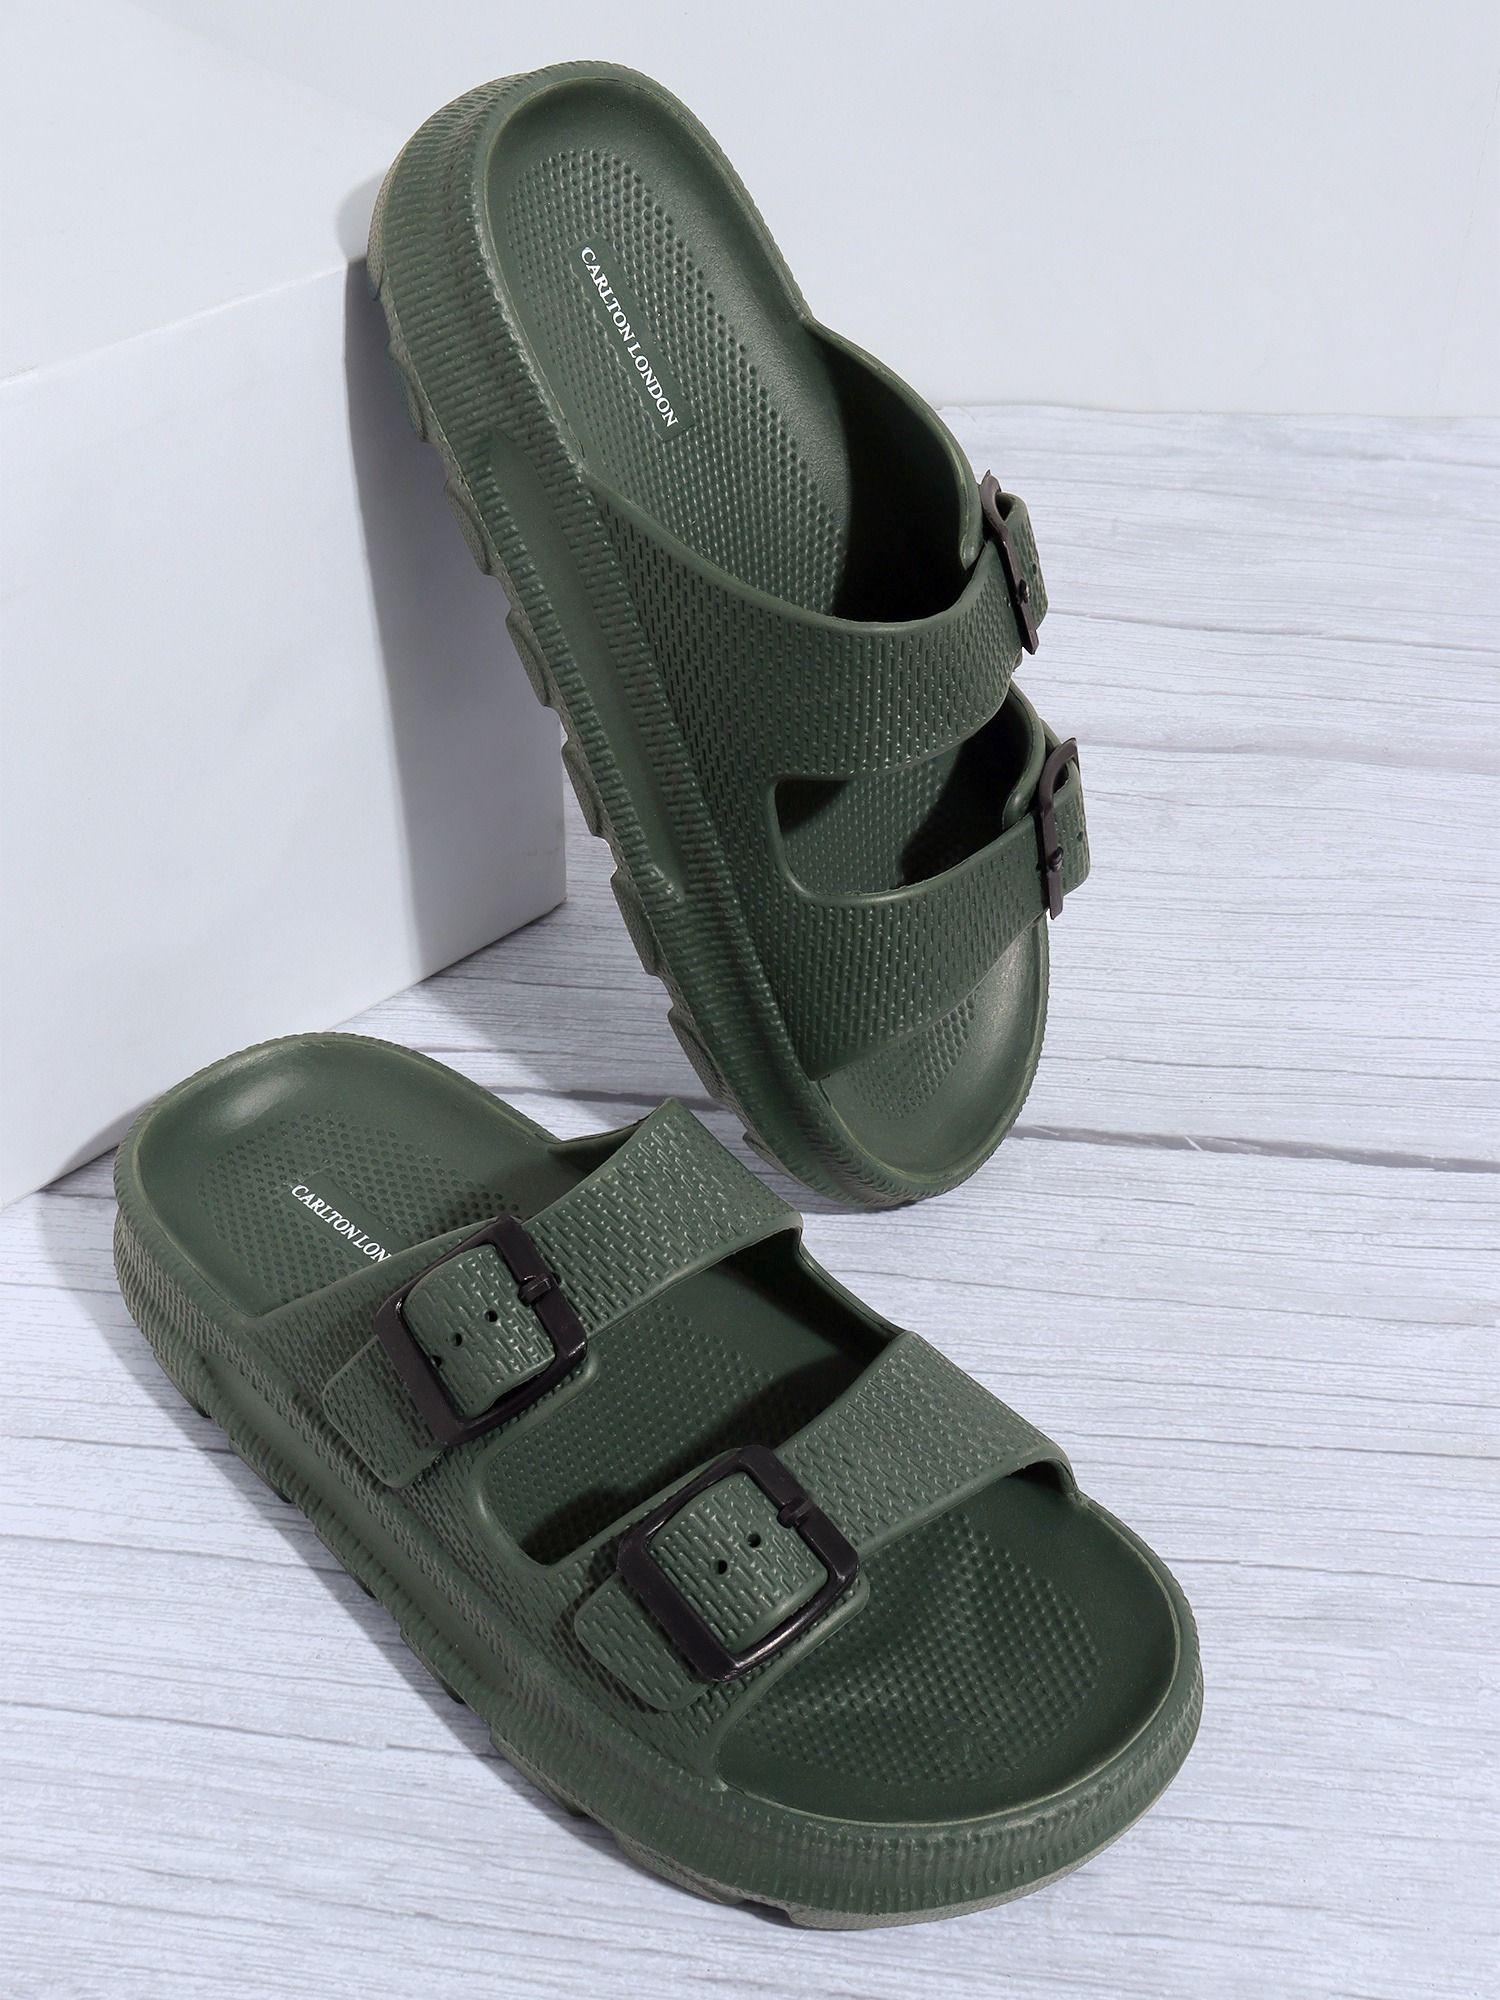 solid olive classic sliders